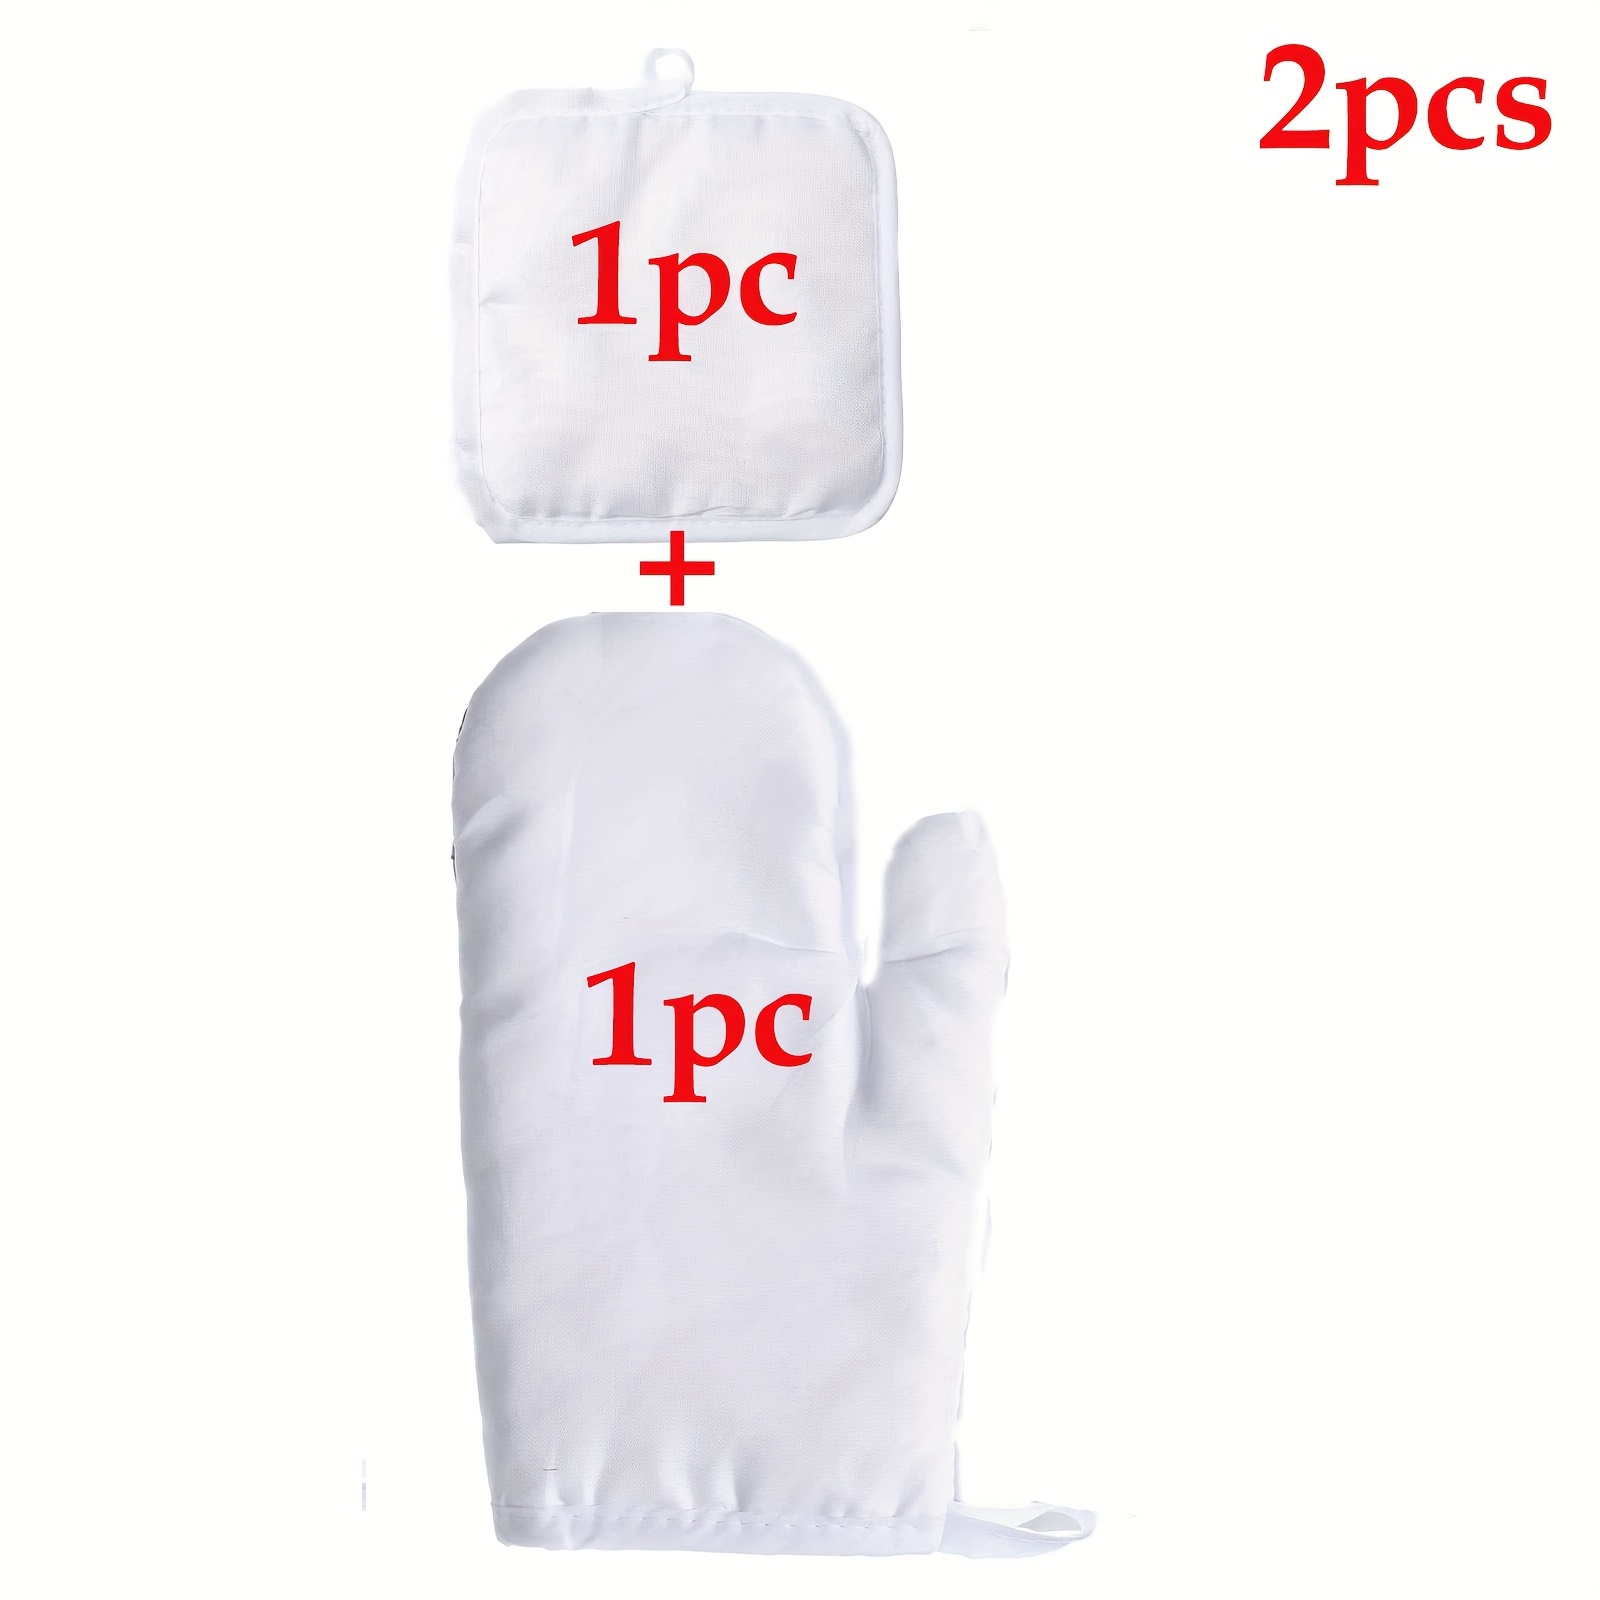 Cooking Cotton Cute Sublimation Mitten Custom Printed Oven Mitt